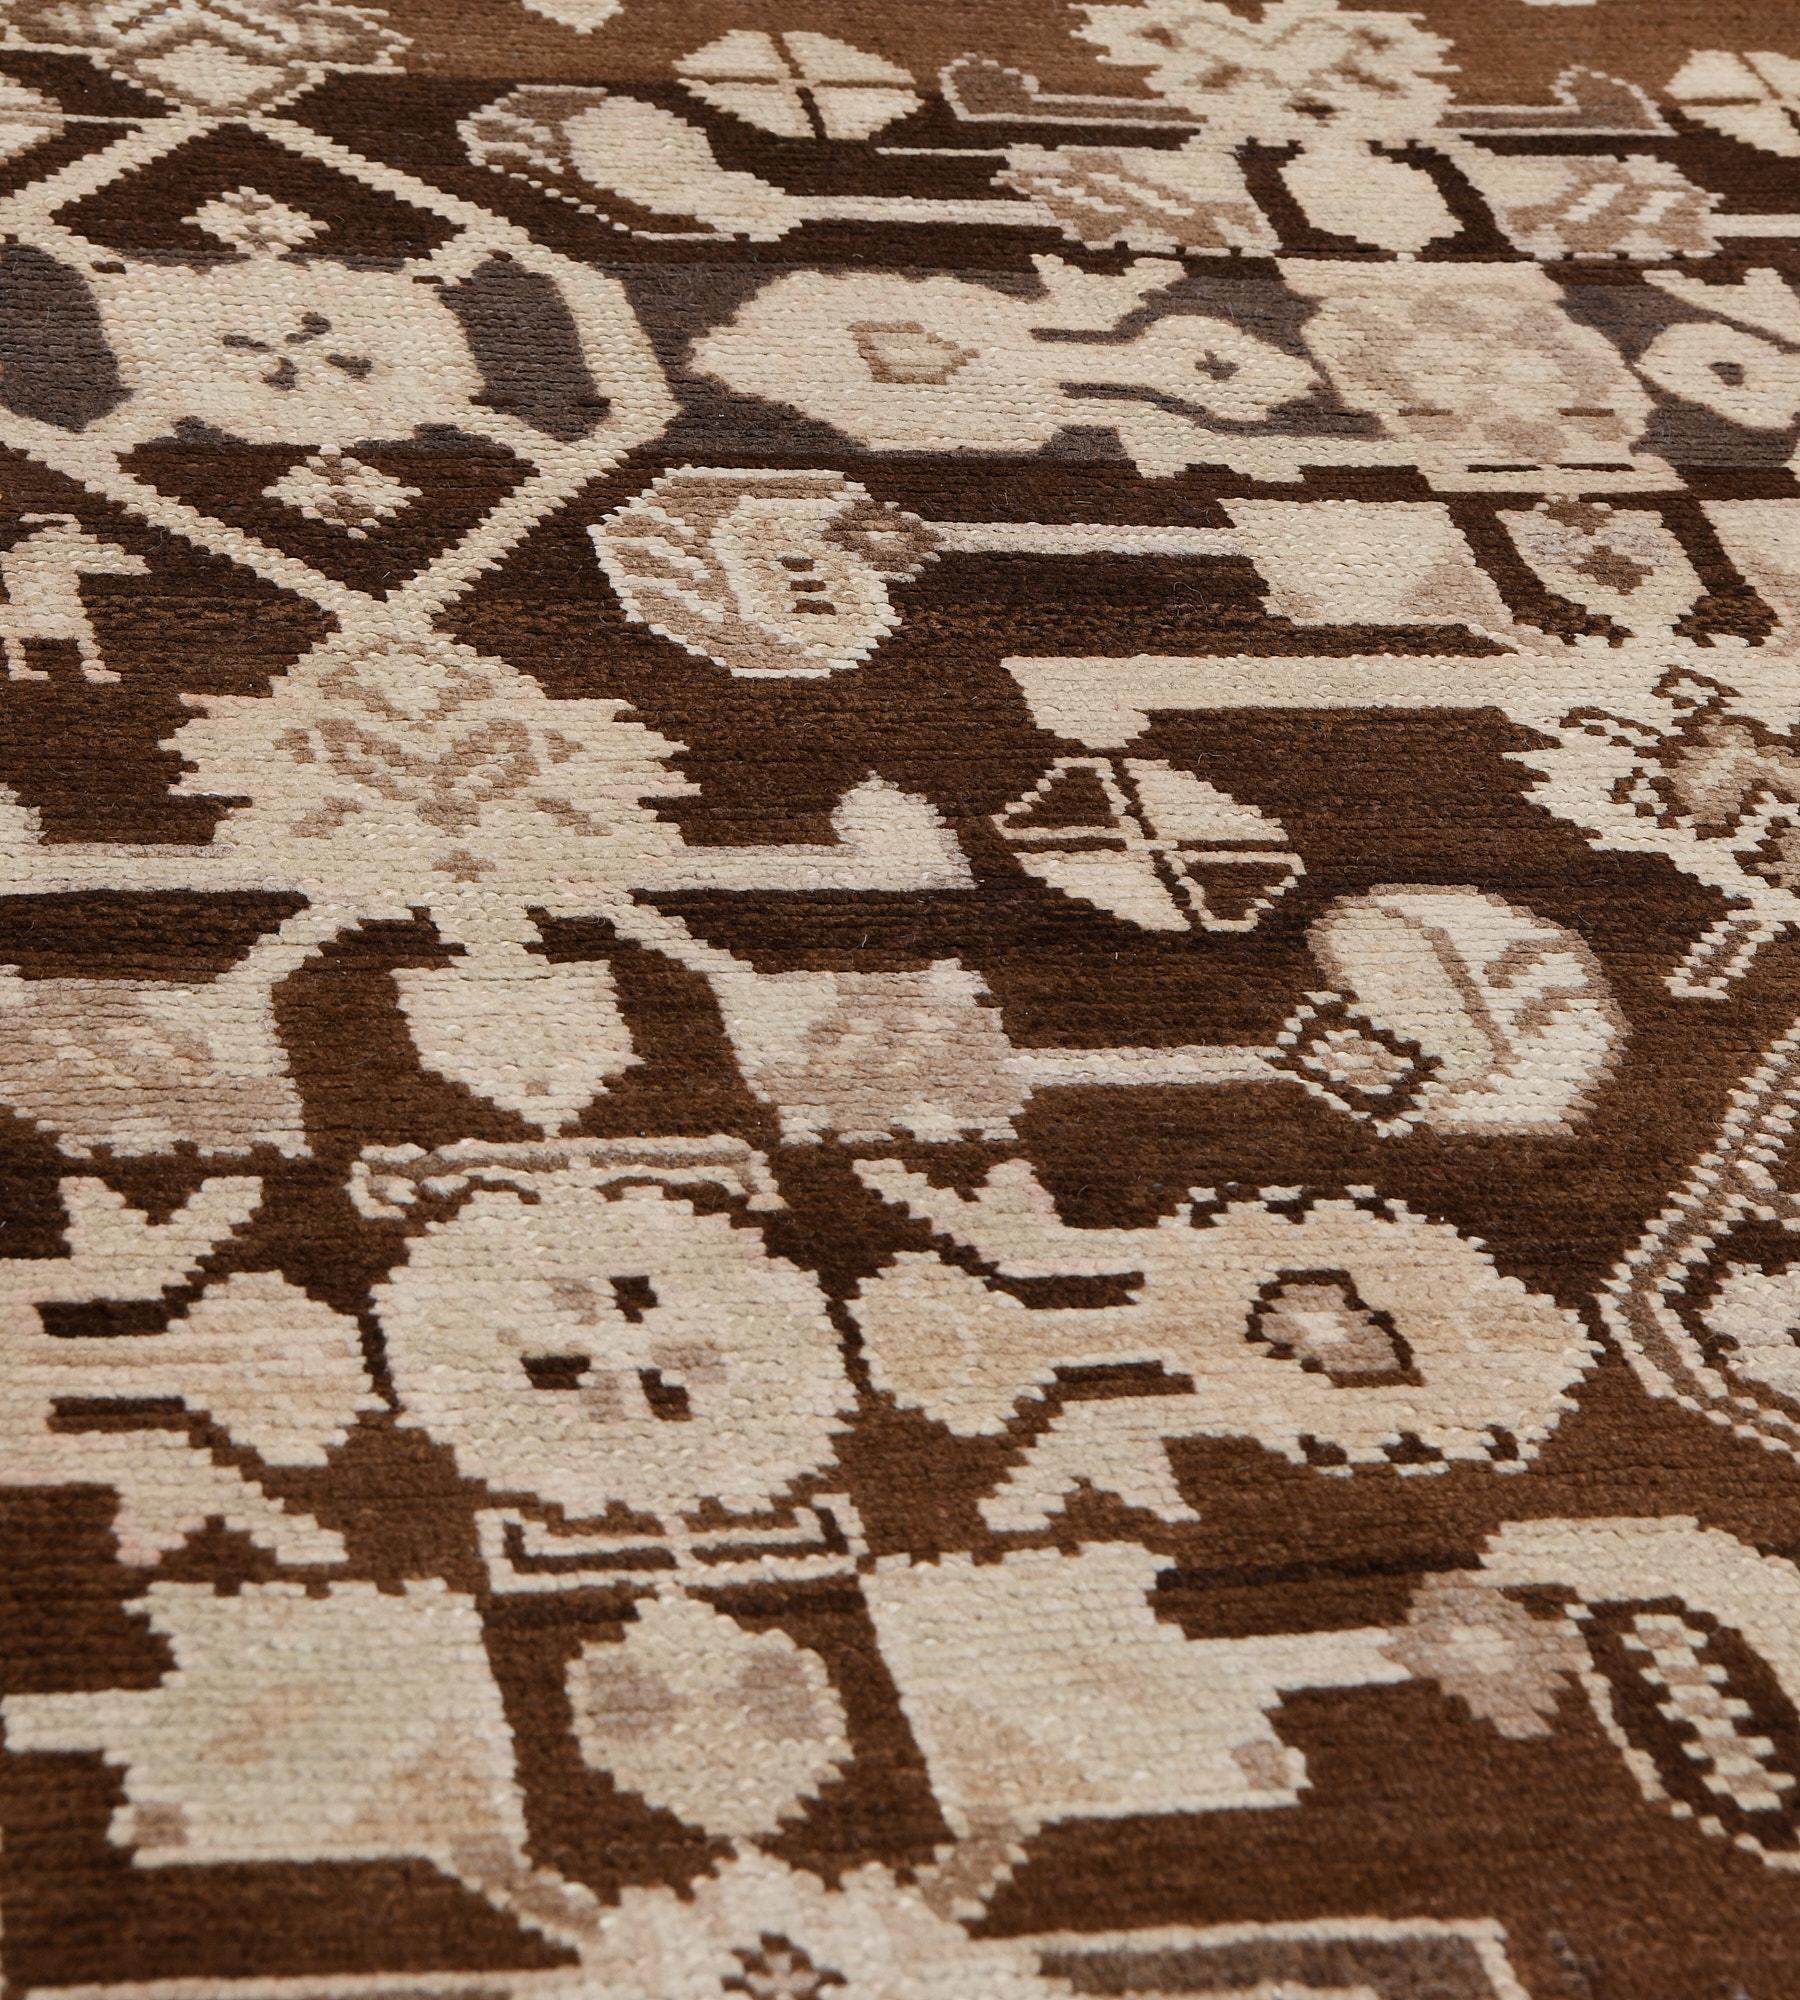 This traditional hand-woven Persian Karabagh rug has a dark tobacco field with an overall counterposed stylized geometric herati pattern, in a sandy saffron border with geometric floral motifs, between geometric stripes, plain outer delicate sandy